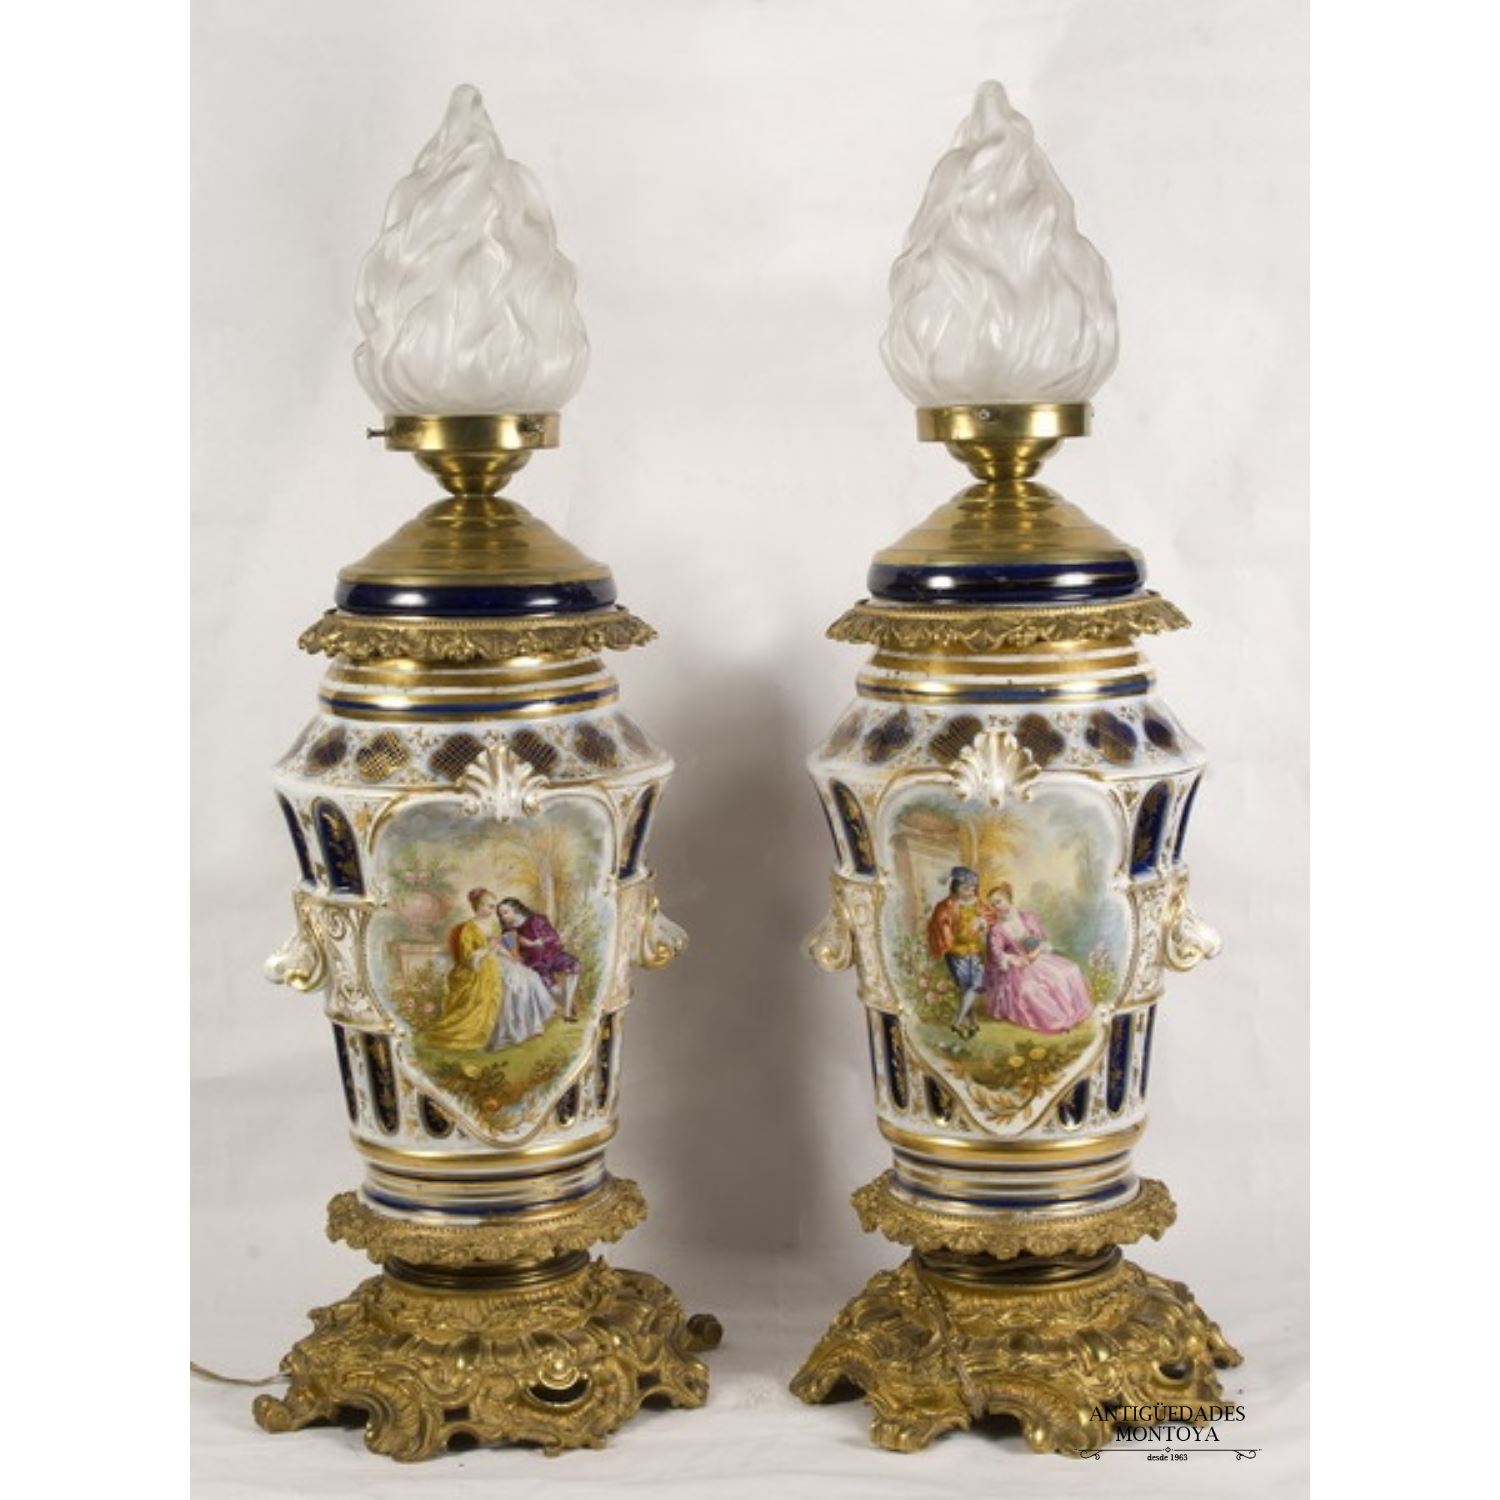 Pair of lamps, early S. XX.